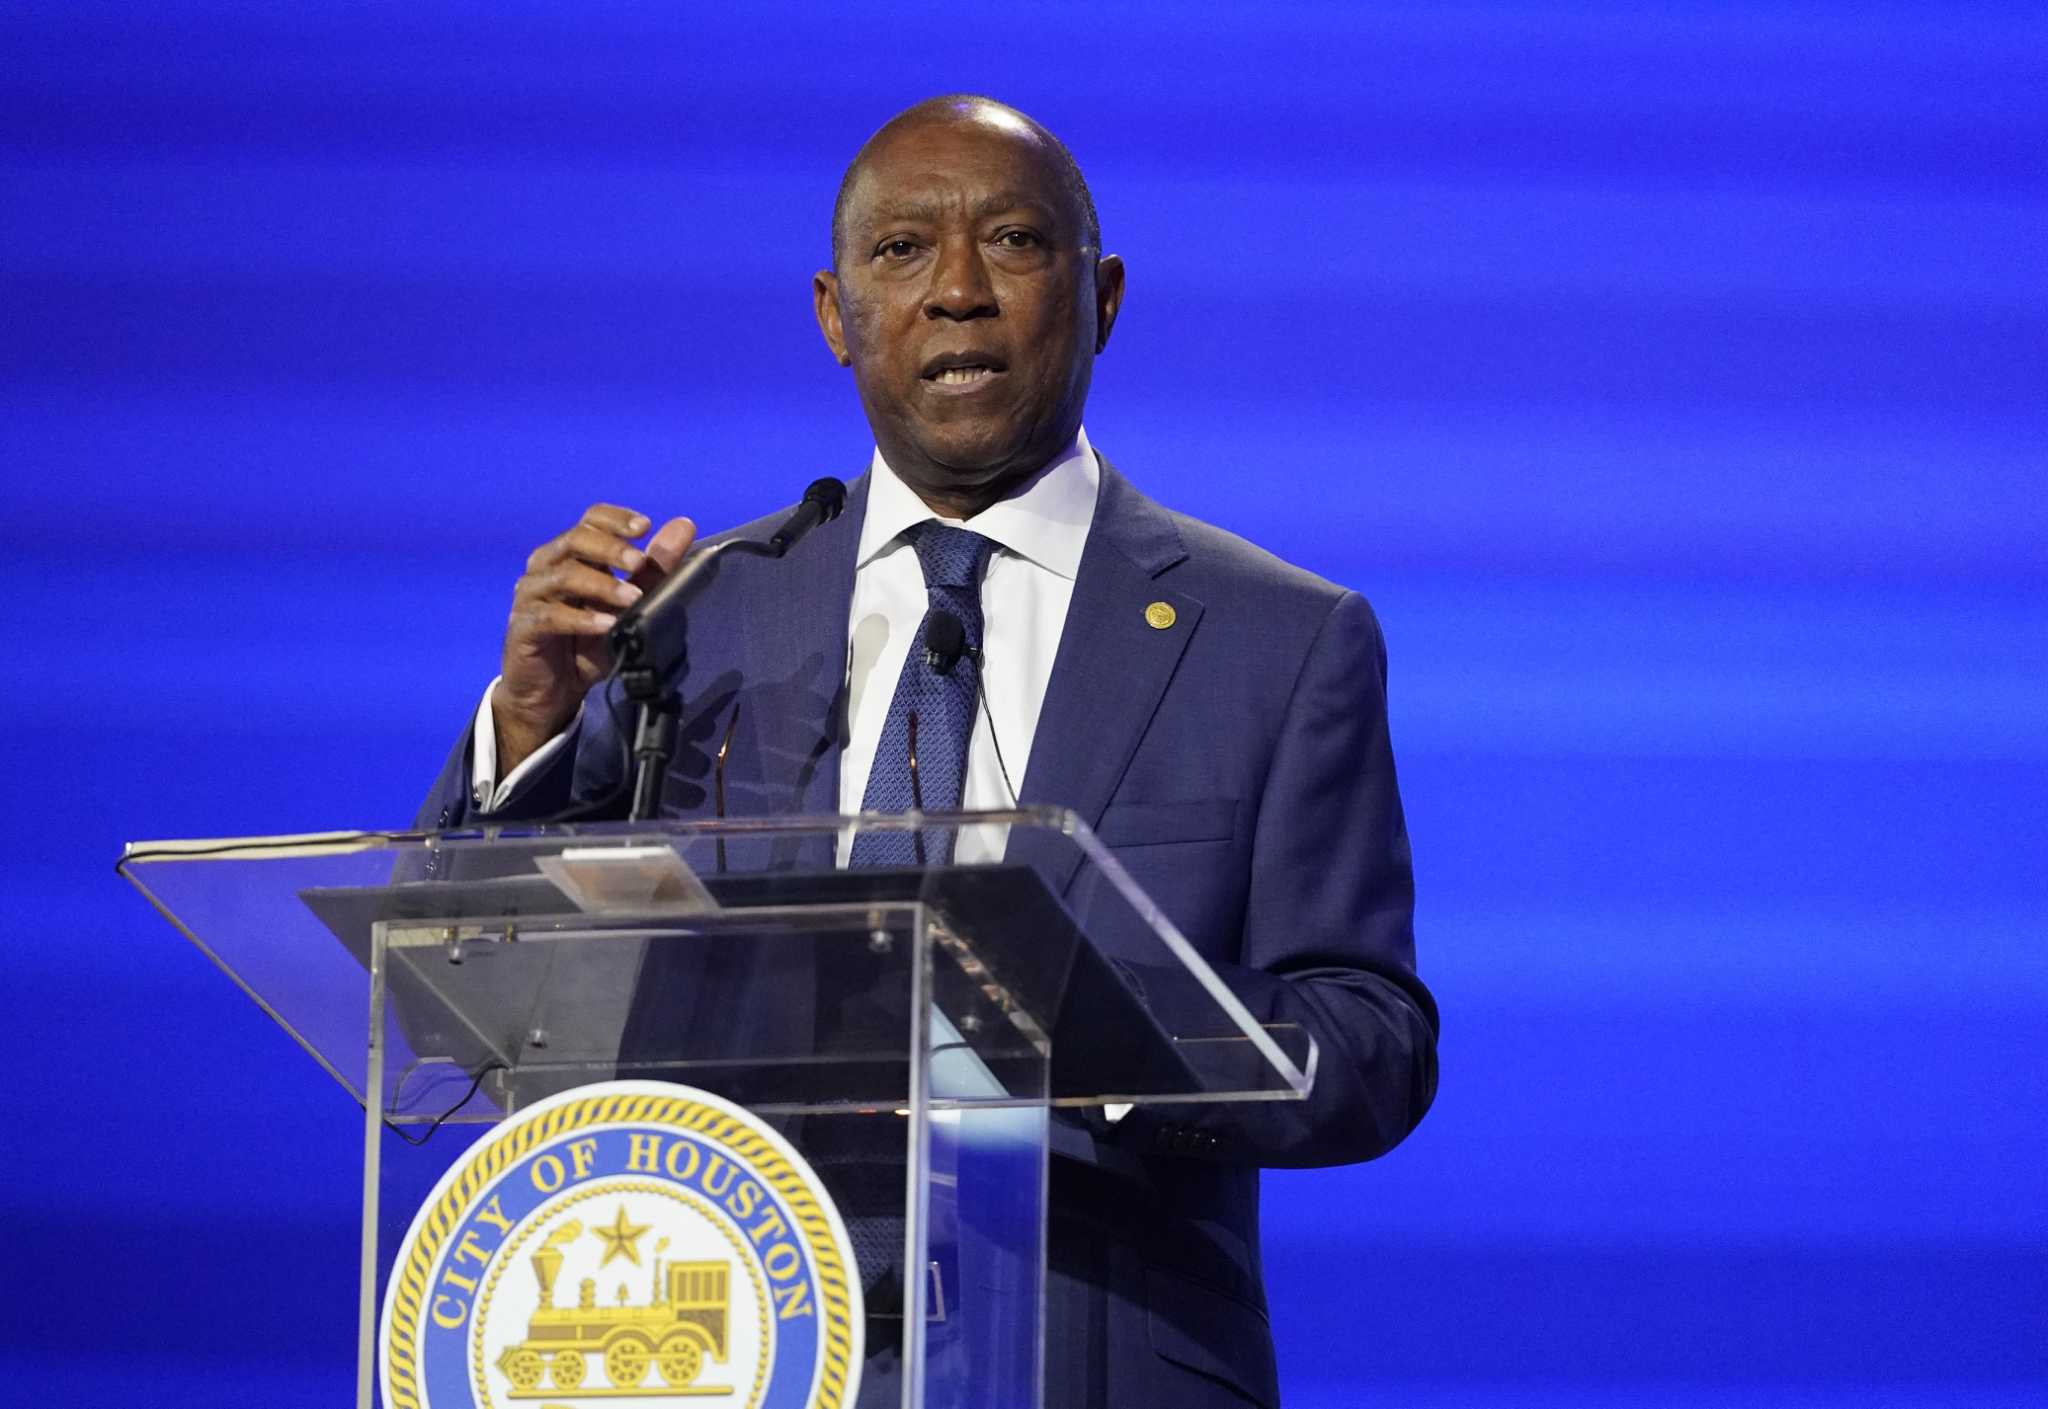 How Mayor Sylvester Turner plans to spend his last year